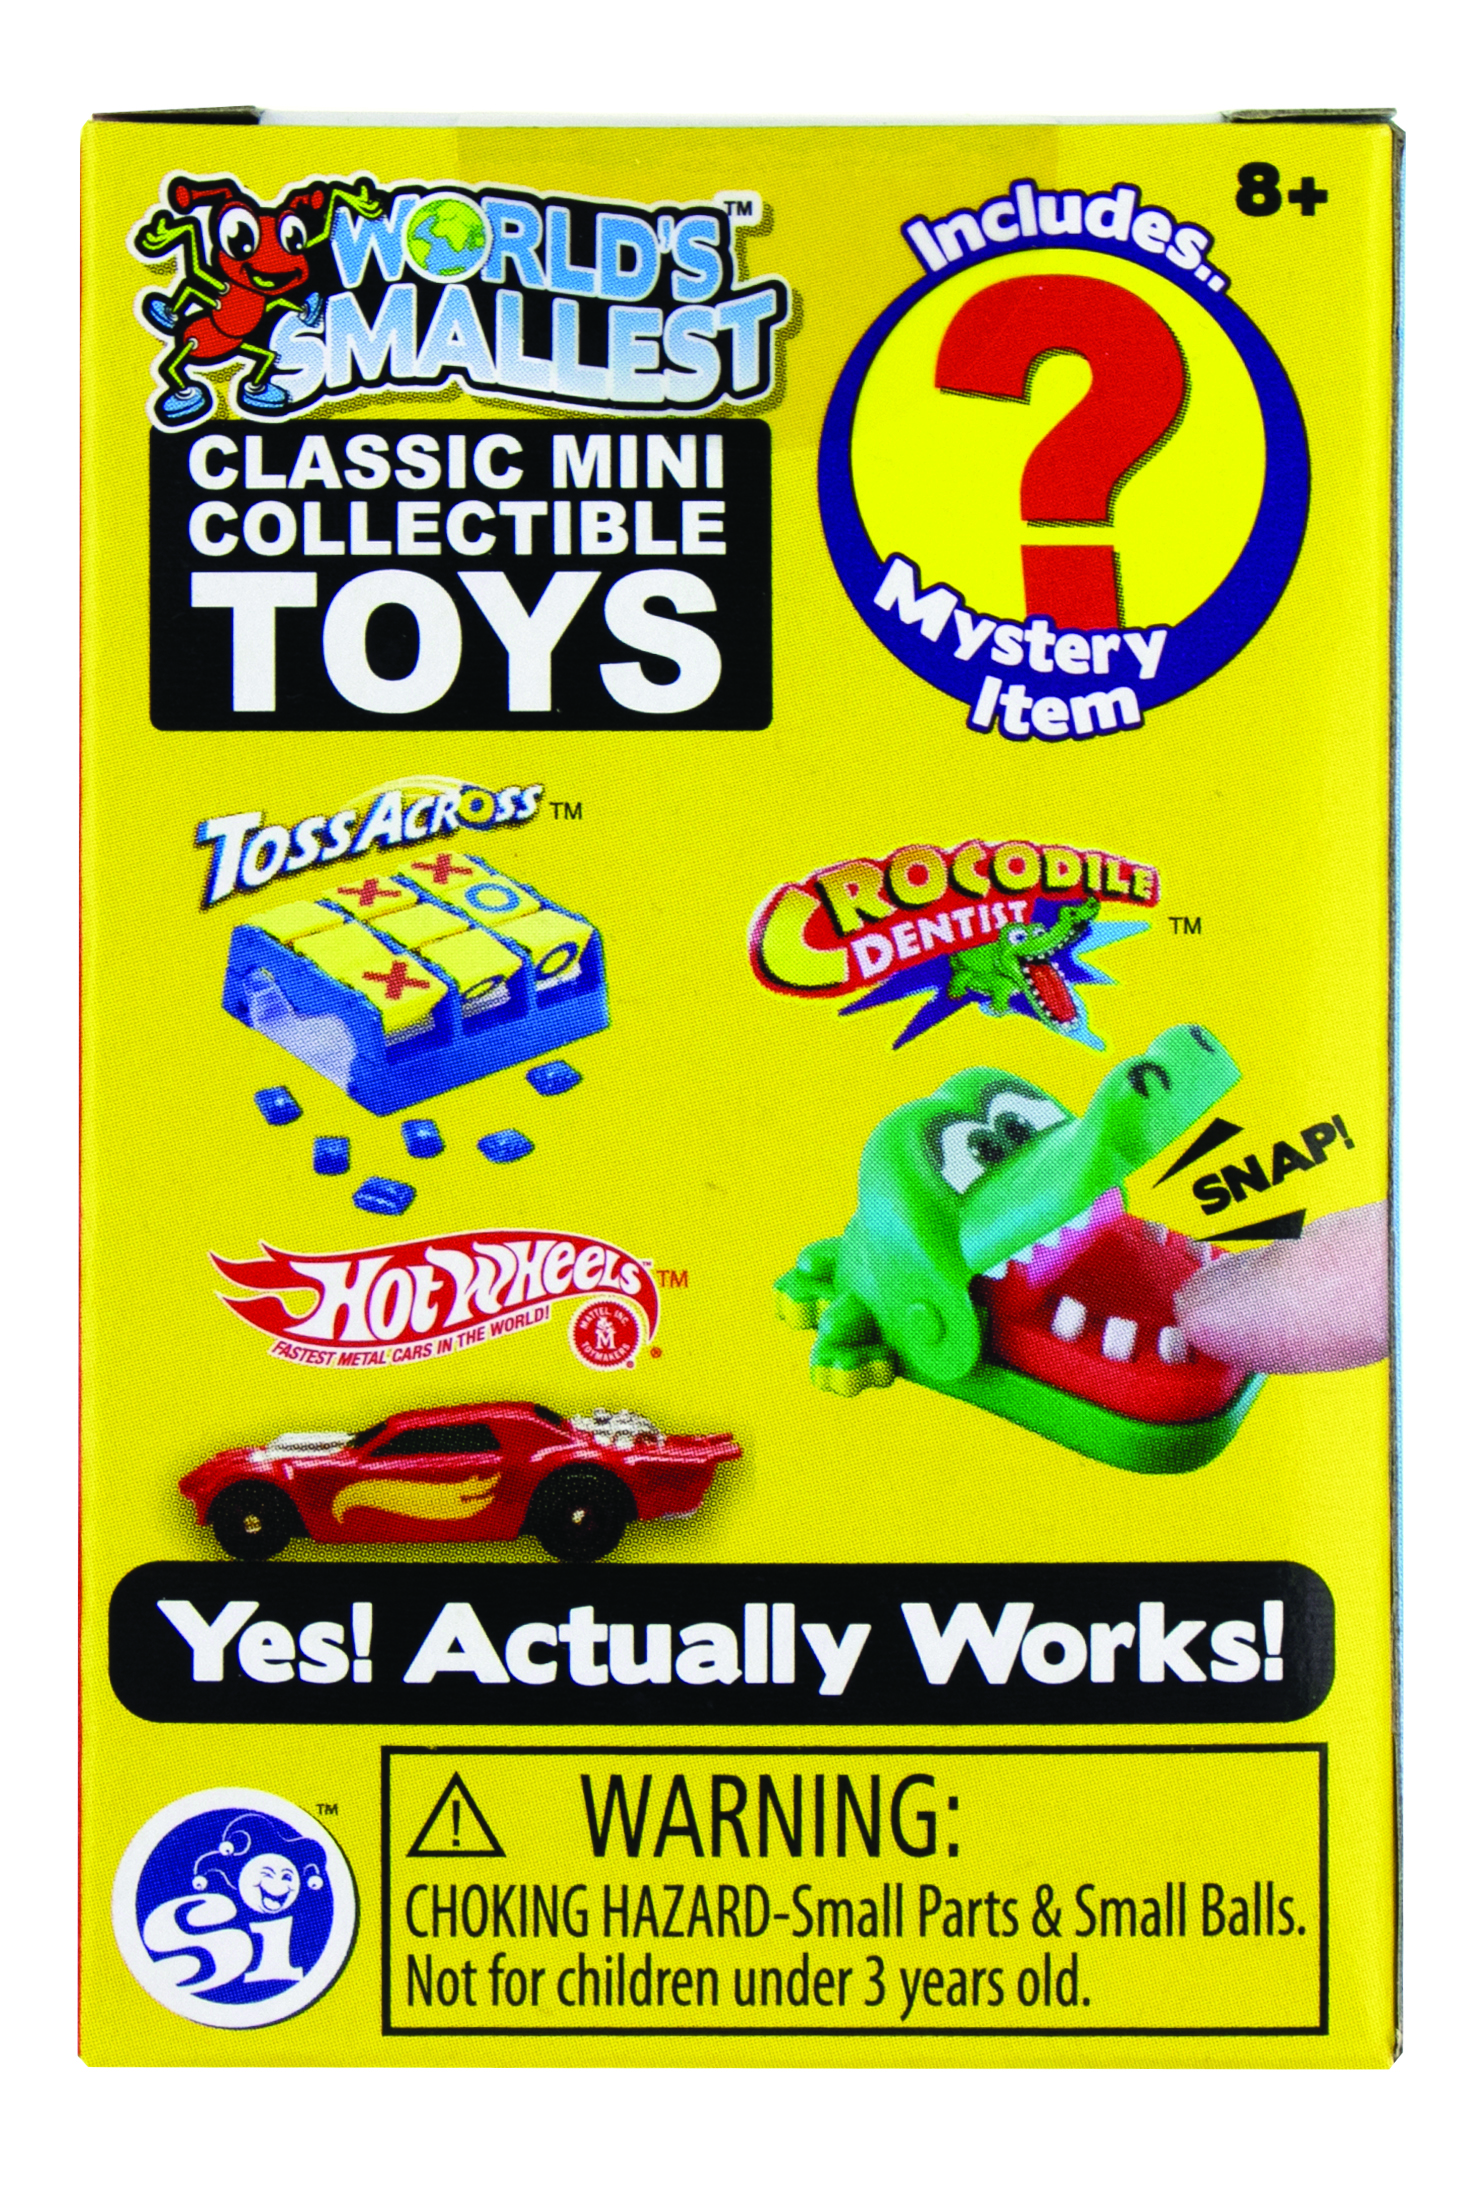  Worlds Smallest Classic Novelty Toy Series 4 Blind Box - 1 Count